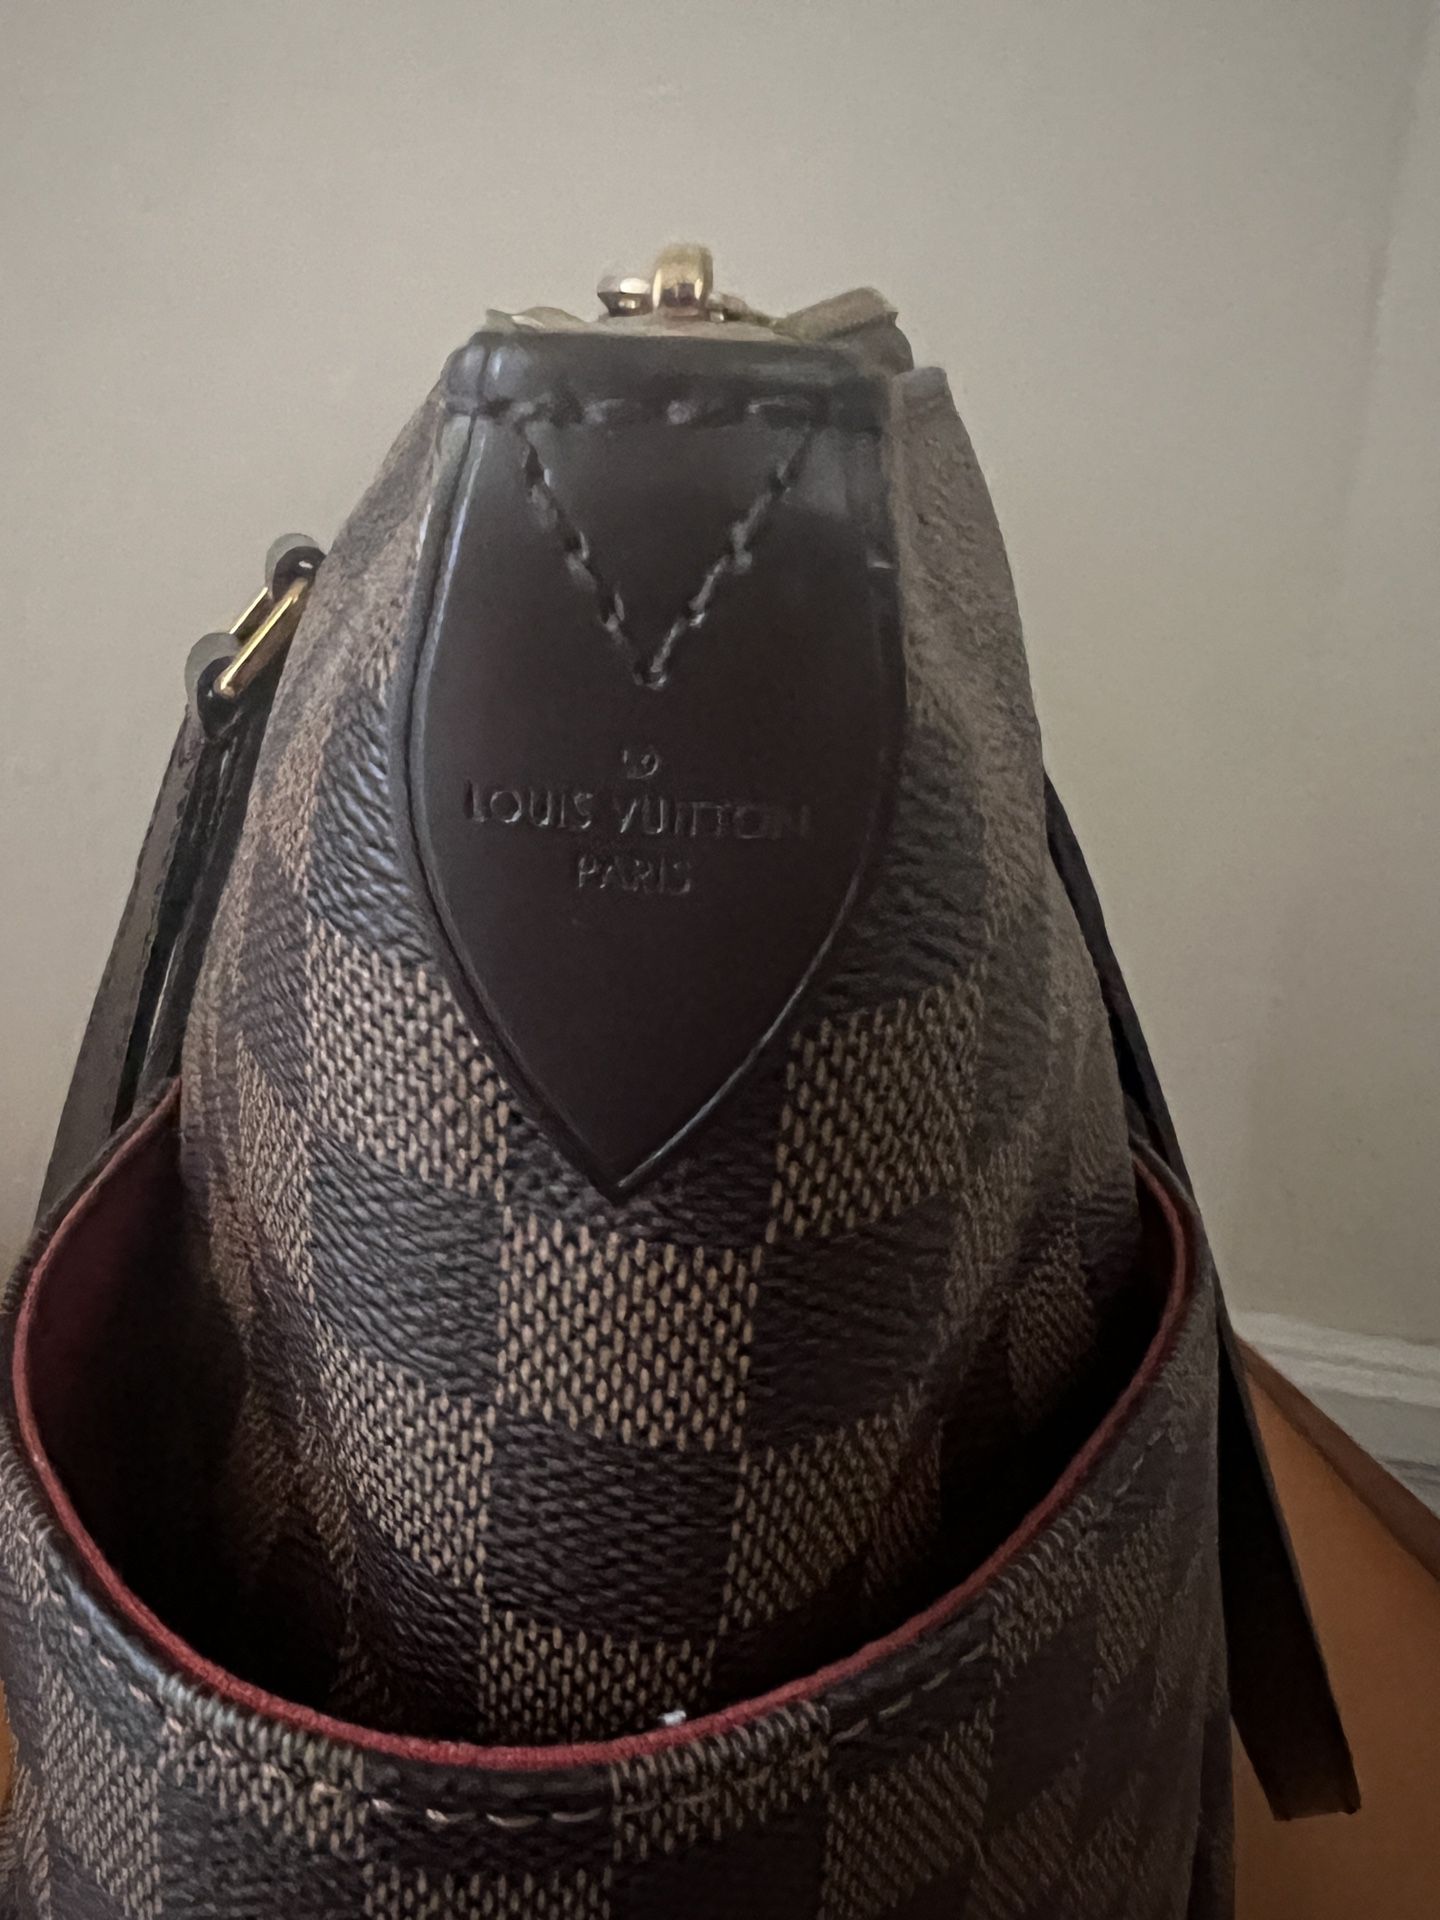 LOUIS VUITTON MAHINA LEATHER BEIGE TOTE # MB0028 for Sale in Westminster,  CA - OfferUp